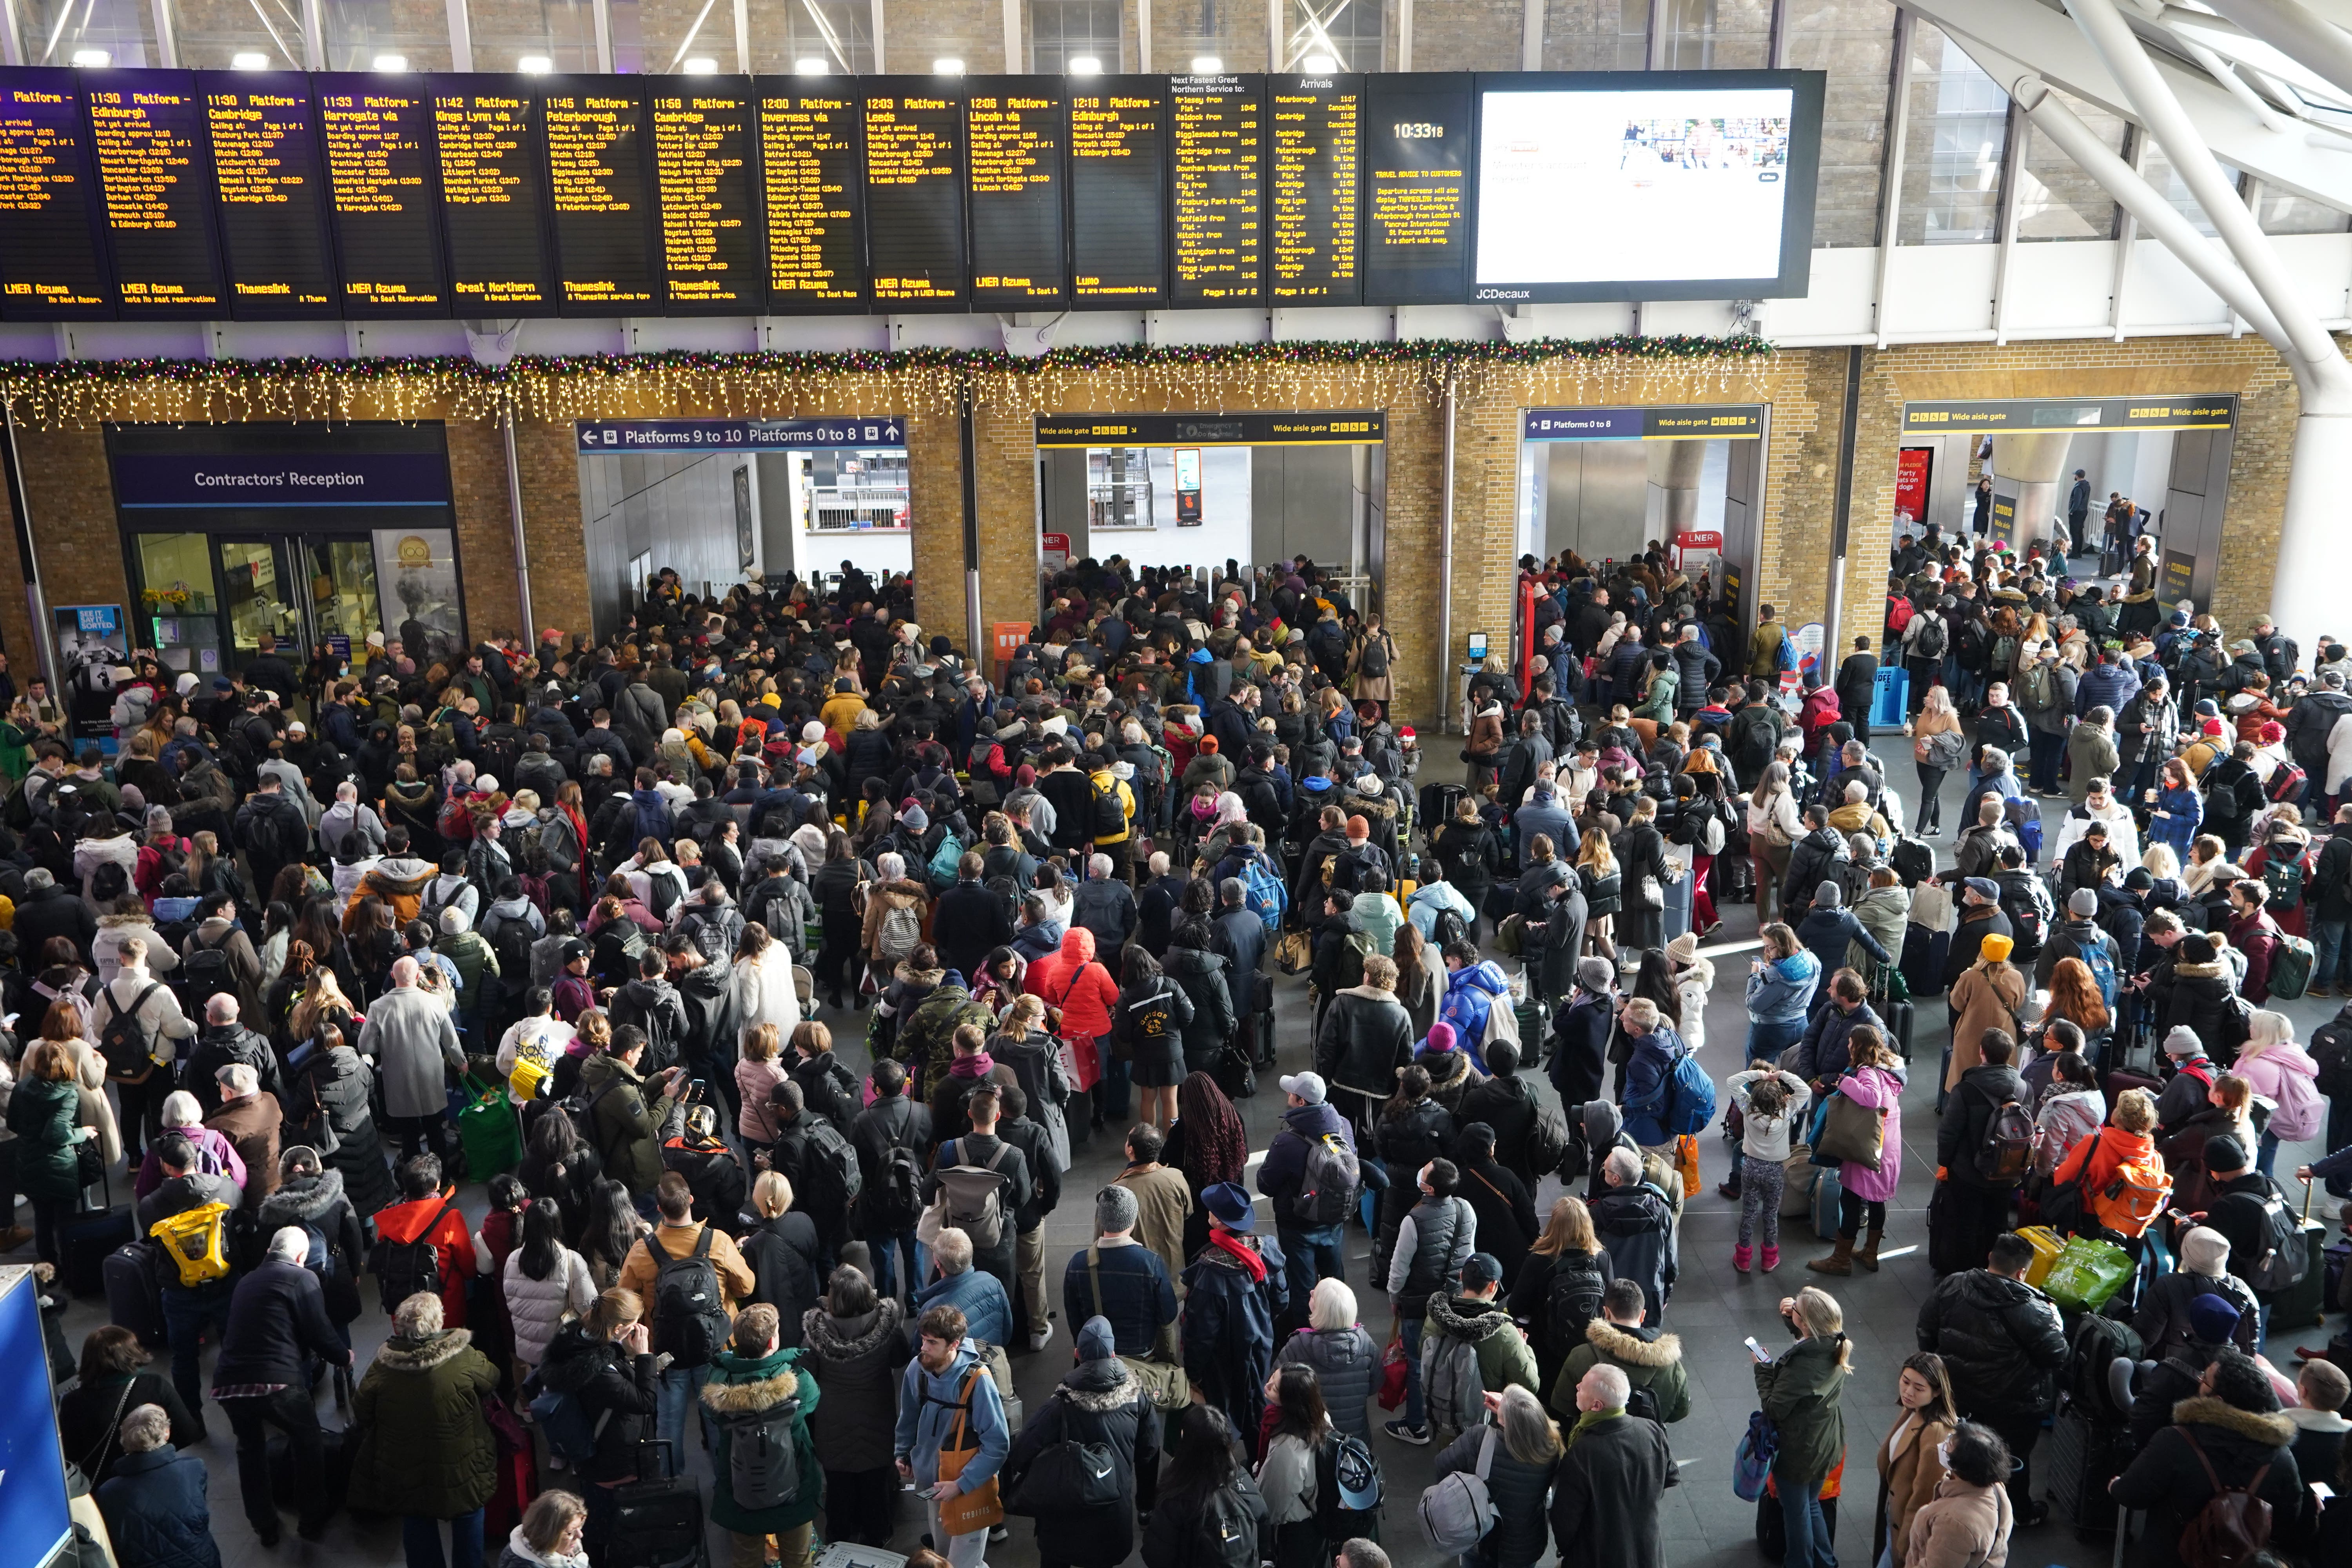 Passengers wait at the barriers at King’s Cross station in London following a strike by members of the Rail, Maritime and Transport union